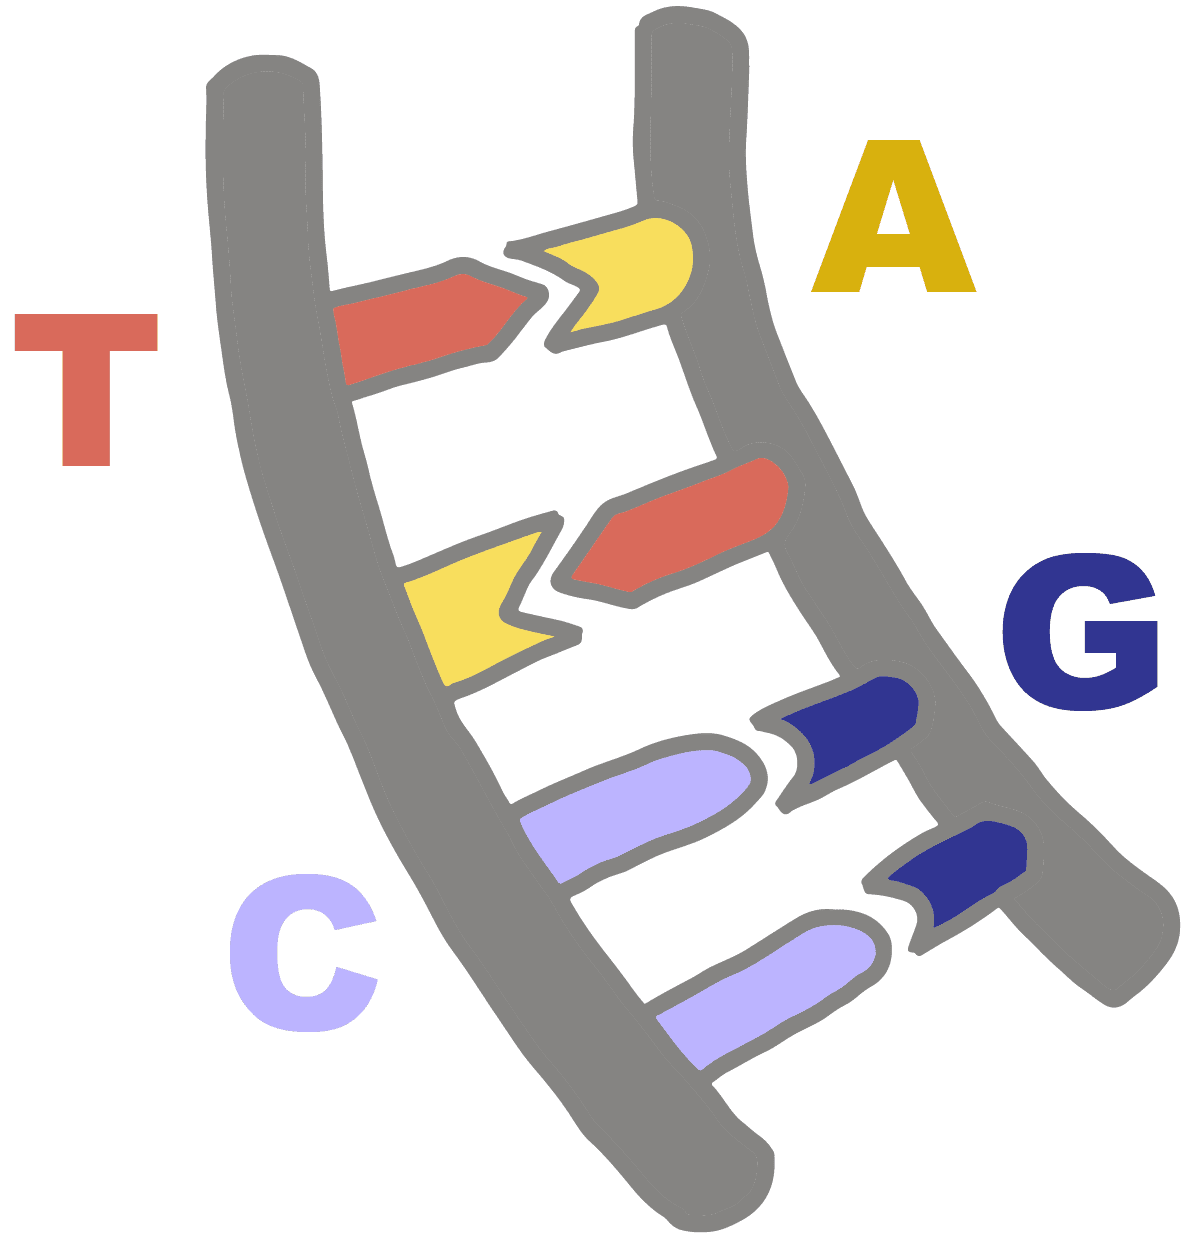 Image of DNA bases pairing with their complementary base, Adenine base pairs with Thymine and Guanine base pairs with Cytosine